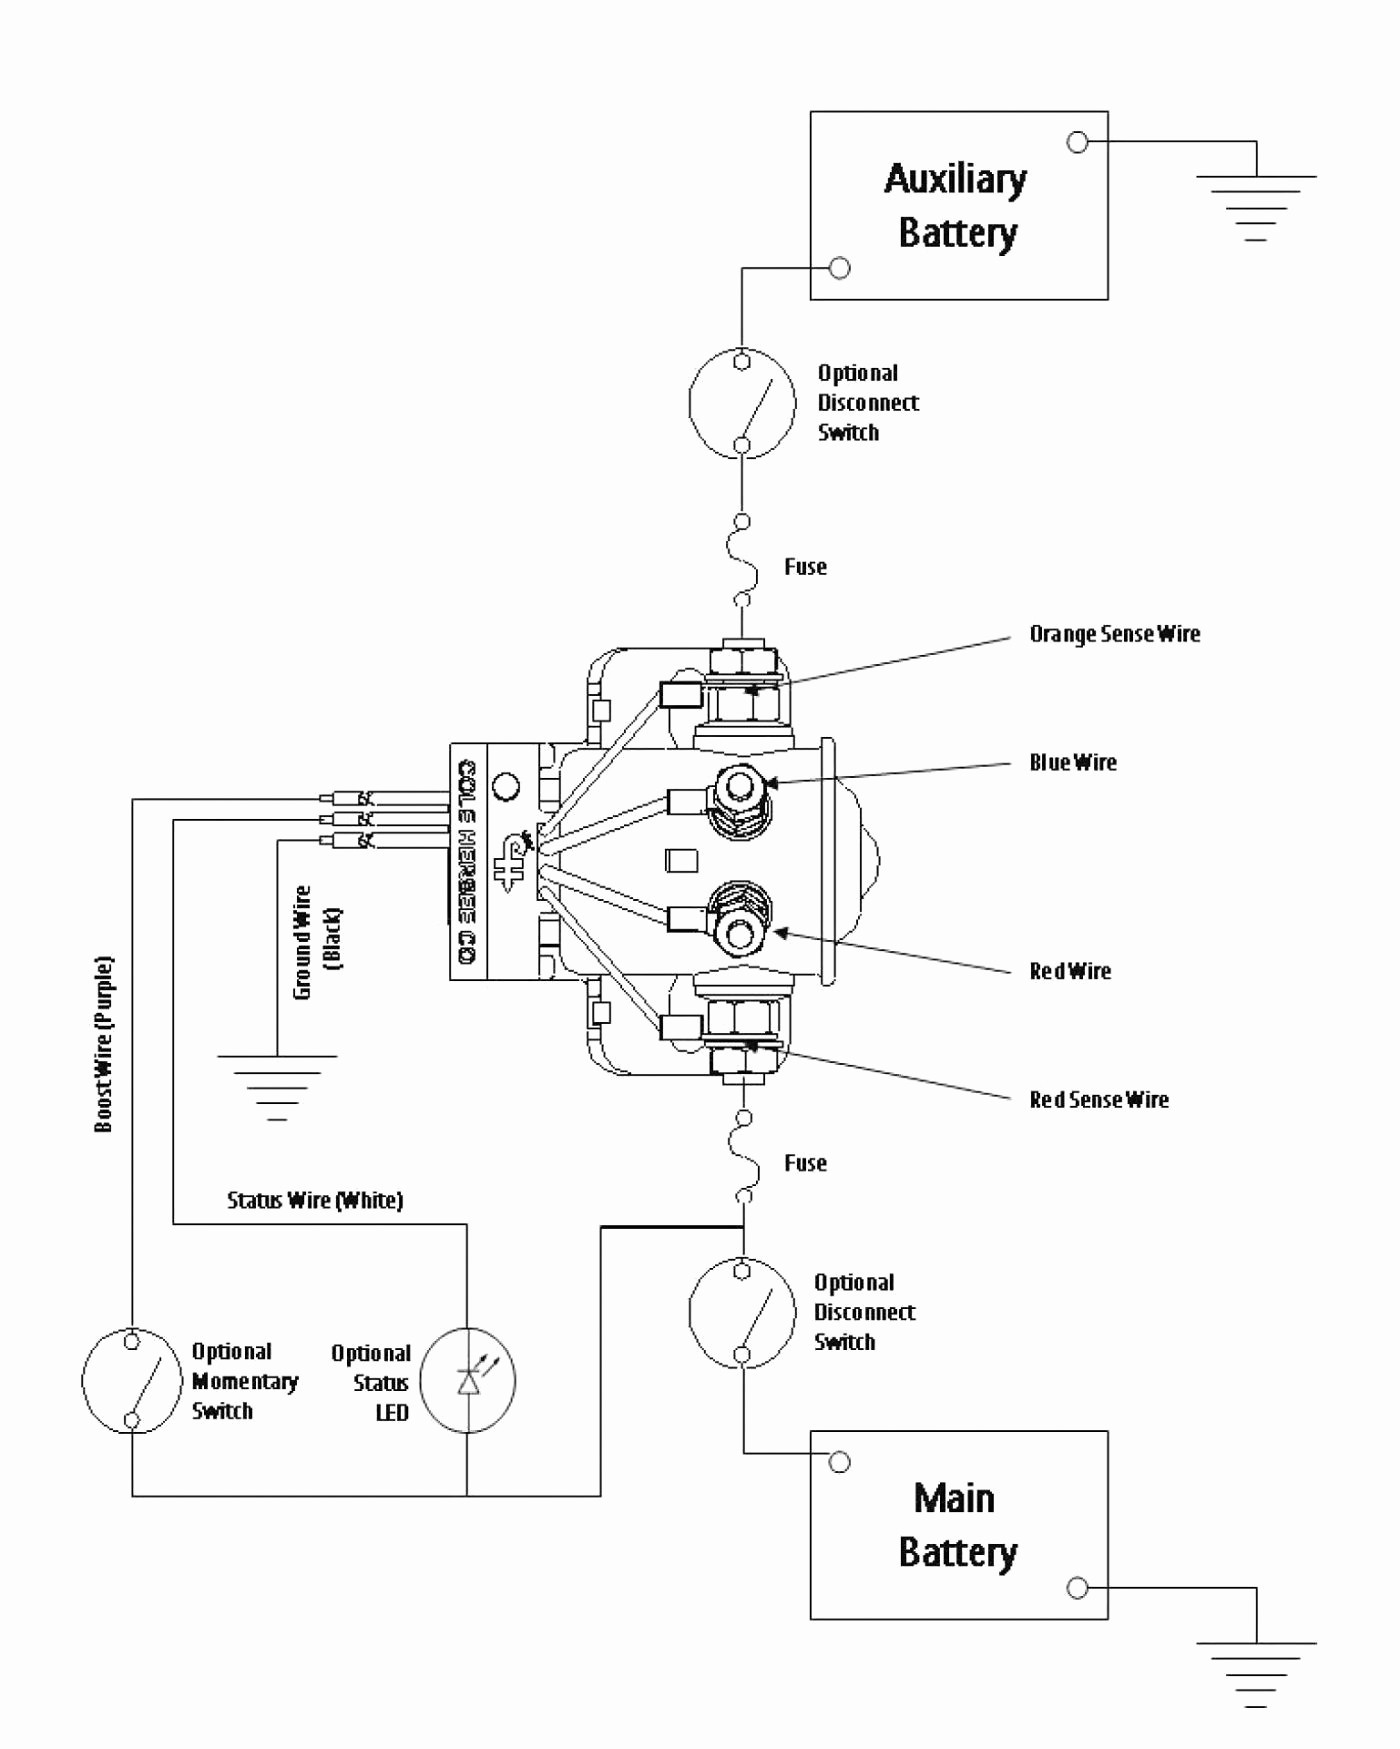 24 Volt Transformer Wiring Diagram Inspirational 24 Volt Relay Wiring Diagram • Electrical Outlet Of 24 Volt Transformer Wiring Diagram